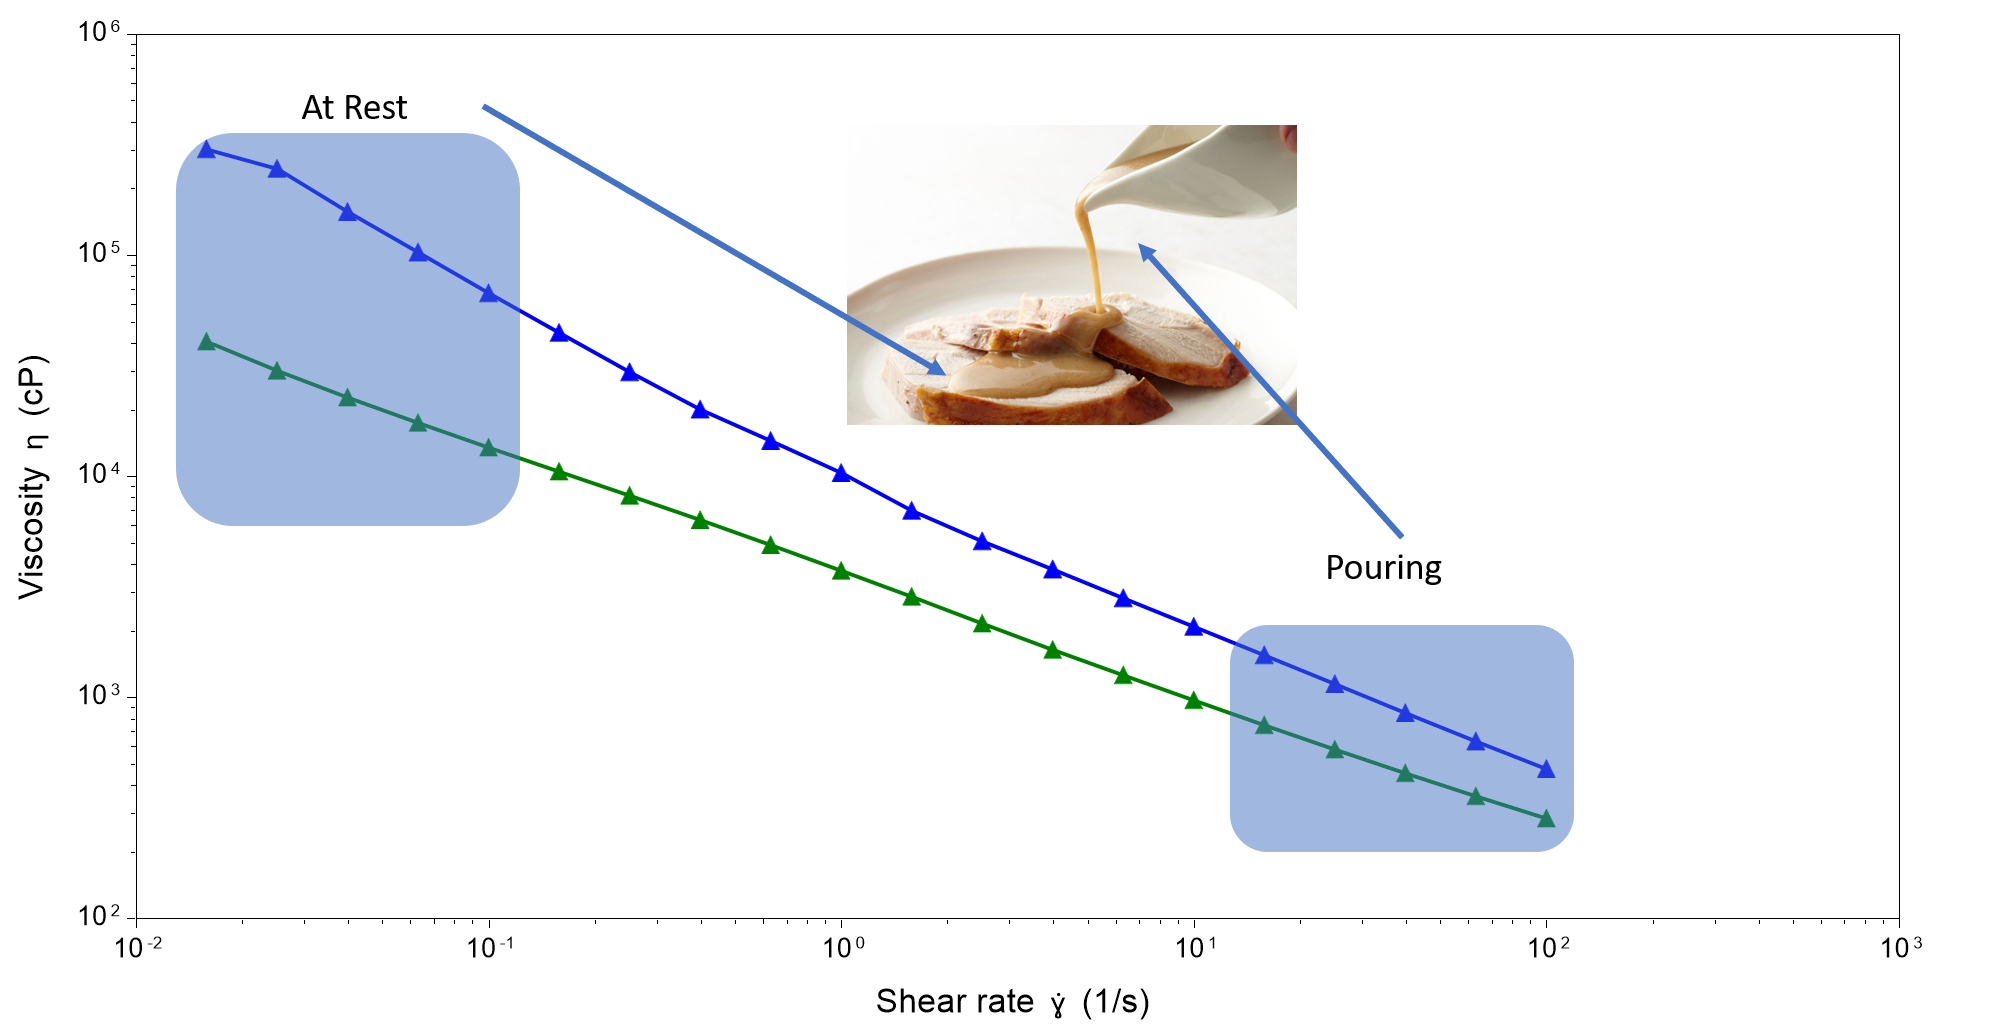 Figure 1. Temperature ramp of canned gravy (blue) and premium gravy (green). Testing was done at 3 °C/minute from 25 °C to 65 °C, or serving temperature.